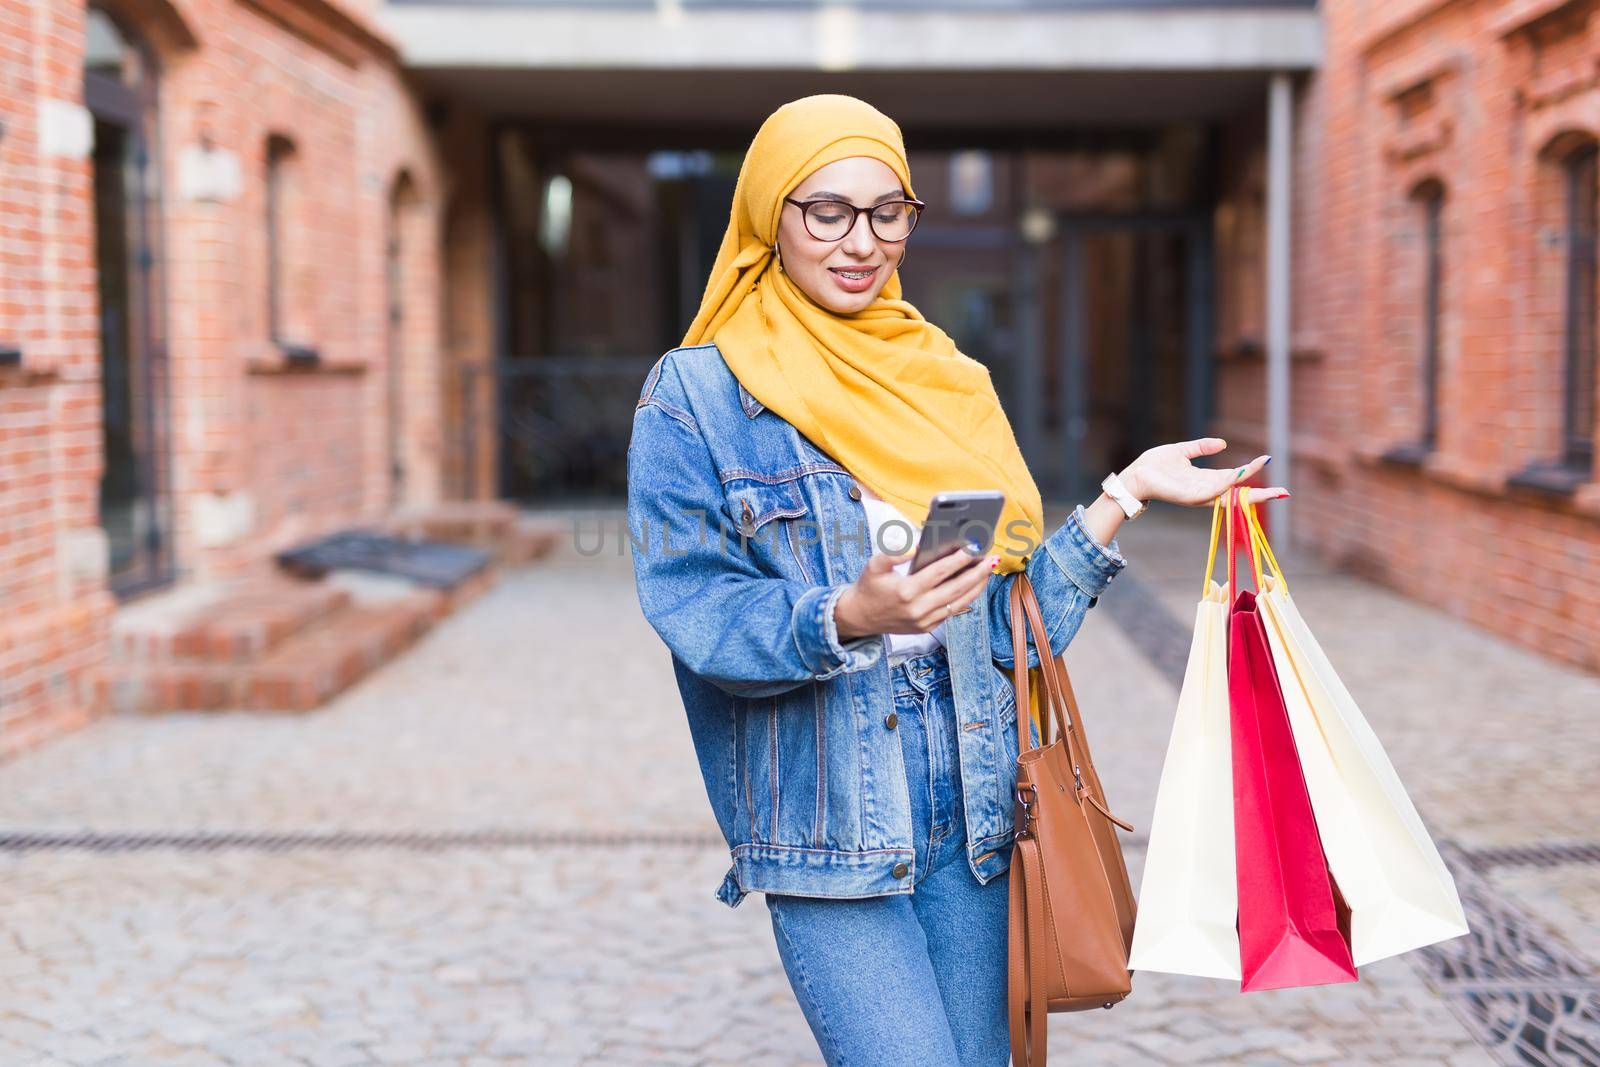 Sale and buying concept - Happy arab muslim girl with shopping bags after mall holds mobile phone by Satura86